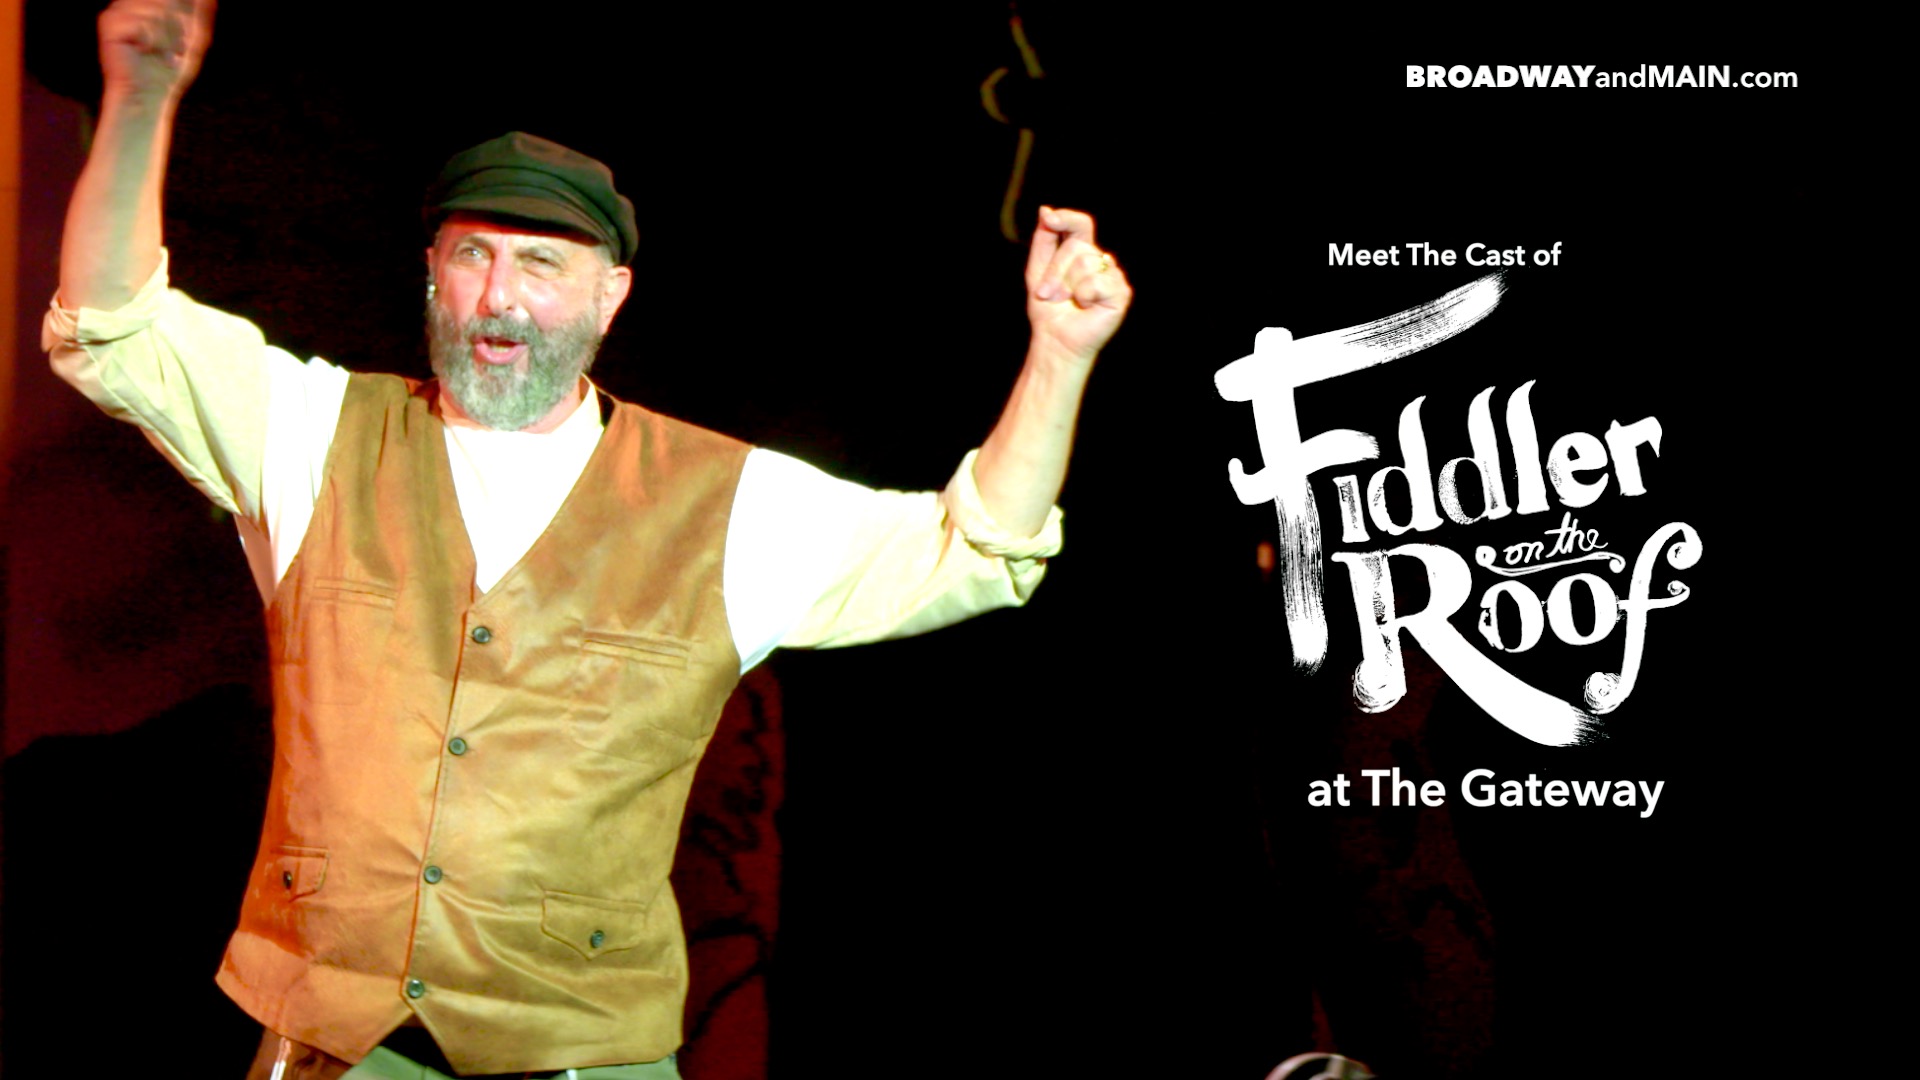 Meet The Cast of Fiddler on the Roof at the Gateway